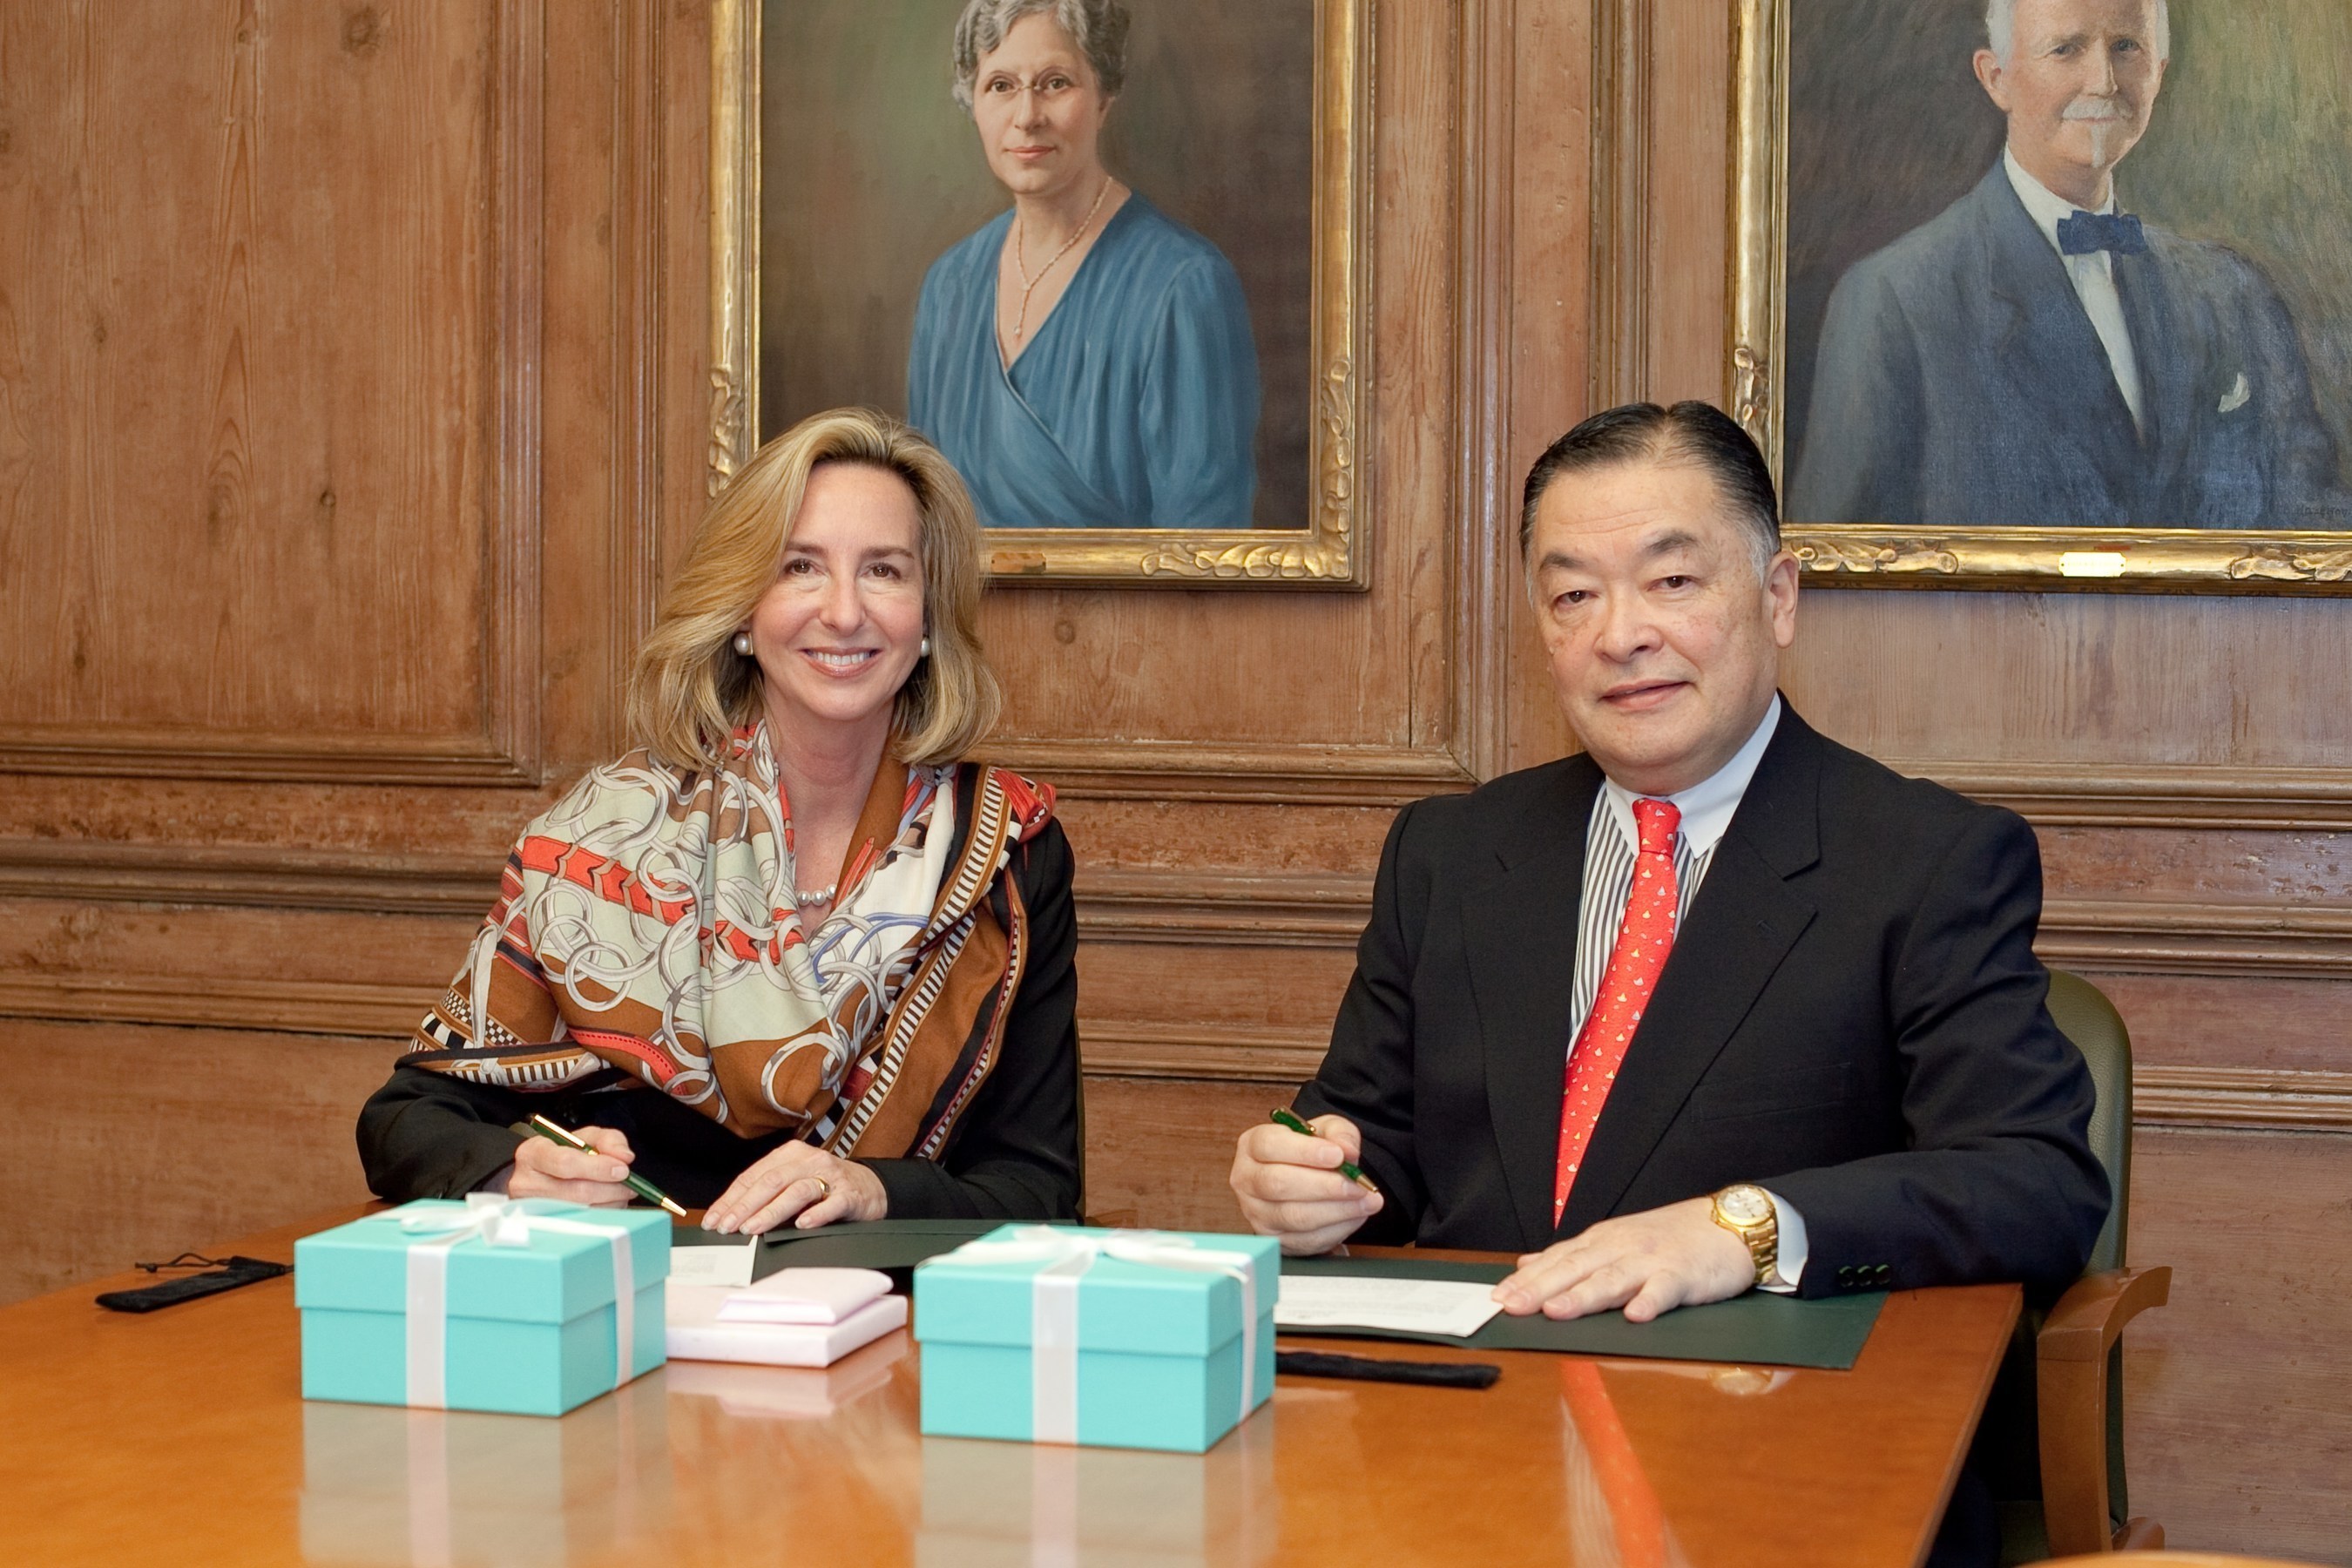 Babson College President Kerry Healey and Tokyo University of Science Chairman Shigeru "Sam" Nakane at Symposium for Entrepreneurship Educators (SEE) signing ceremonies held at Babson College